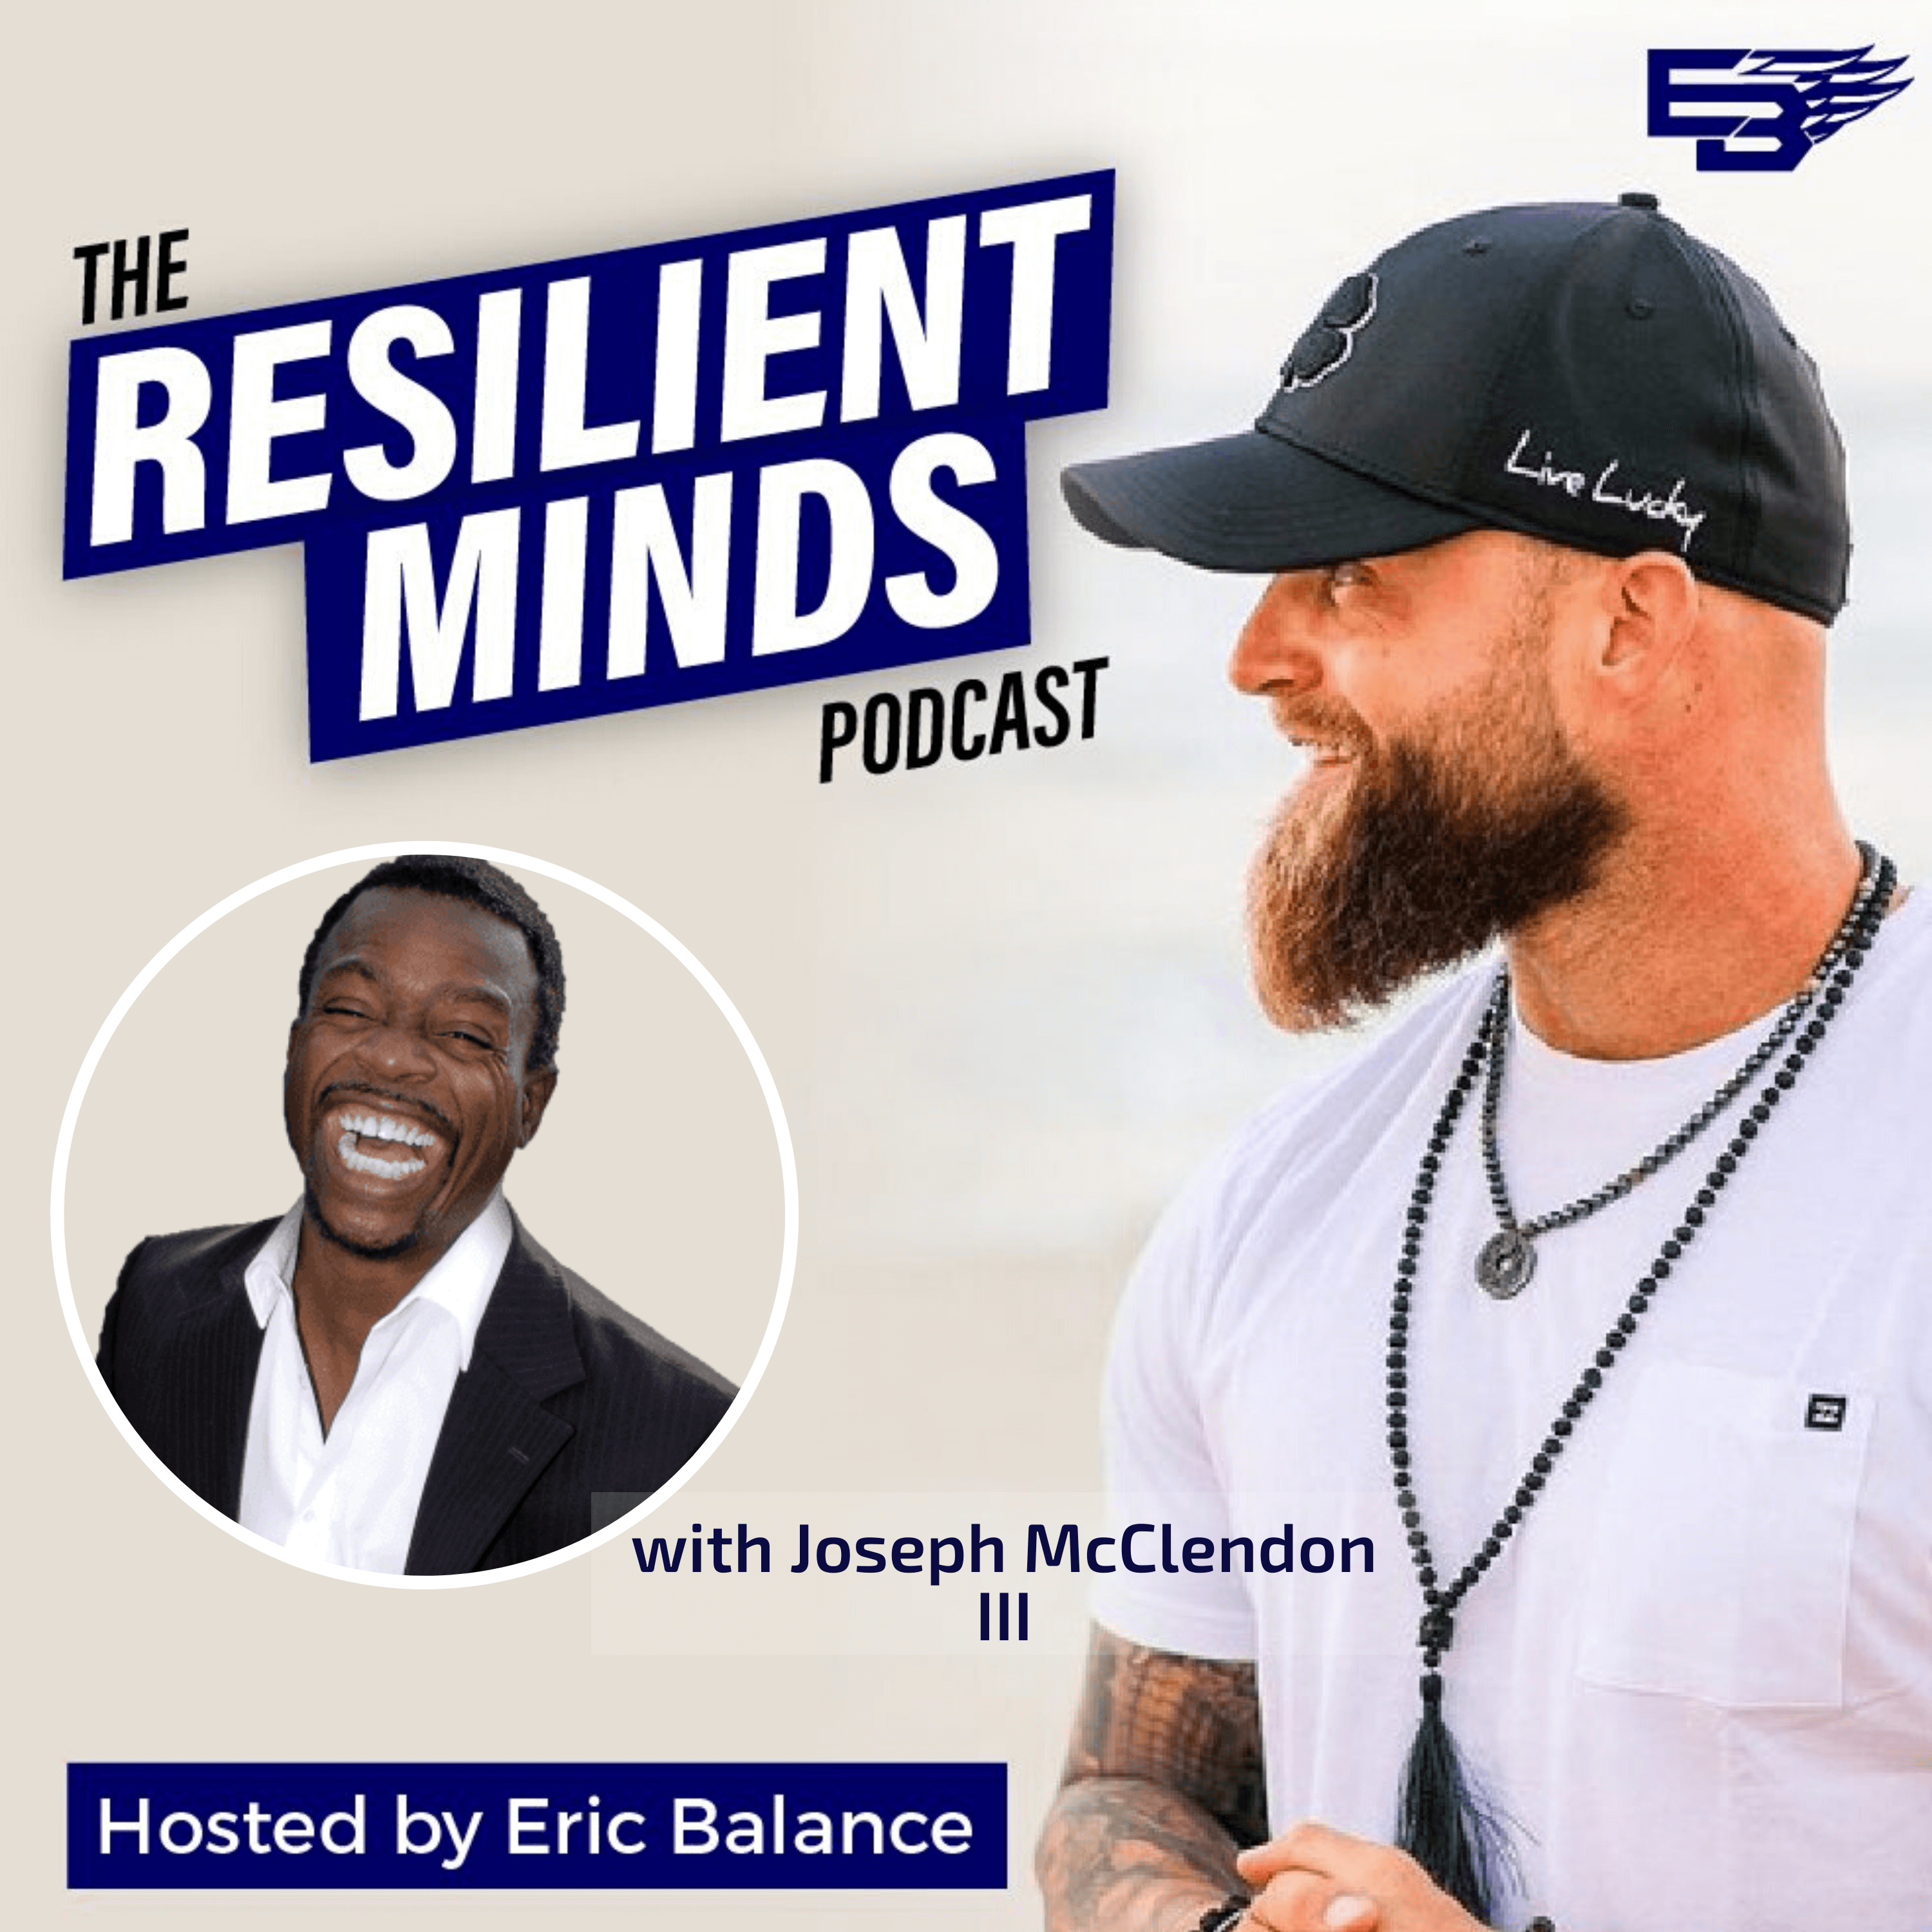 Episode 32 – How to Take Racial Tension and Turn it Into Unified Love with Joseph McClendon III.